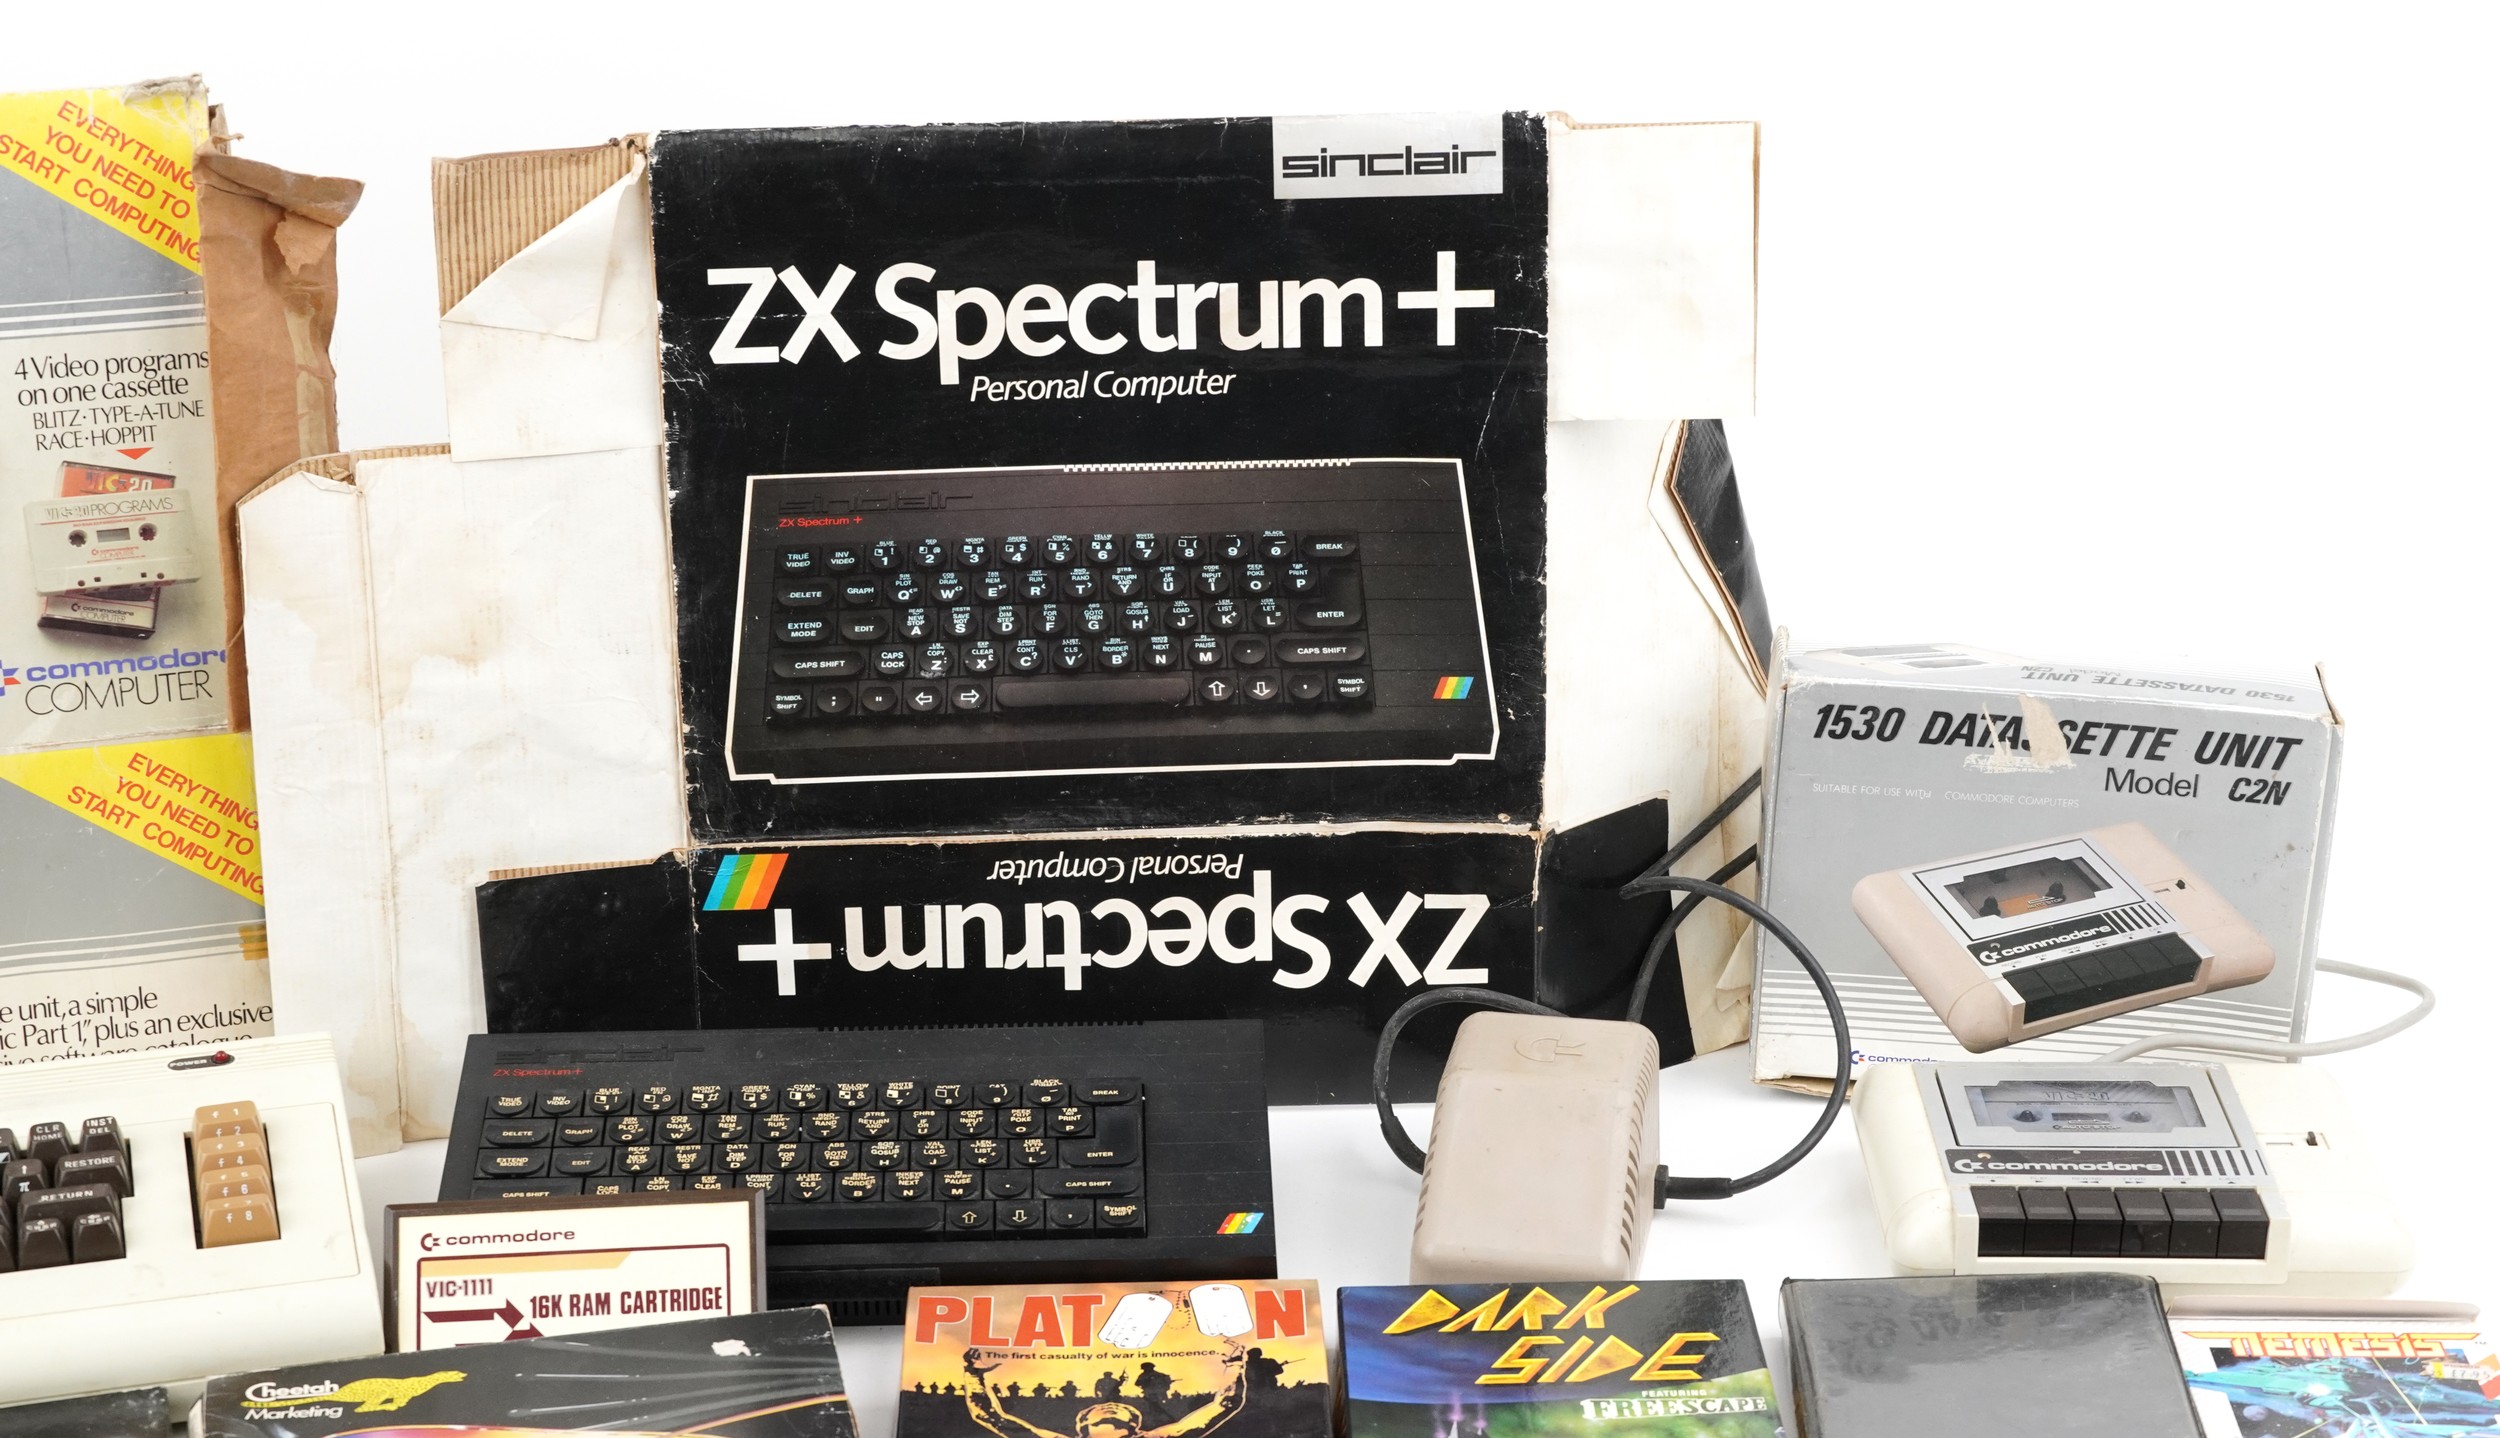 Commodore ZX Spectrum personal computer with accessories and games including 1530 Datasette unit - Bild 3 aus 5